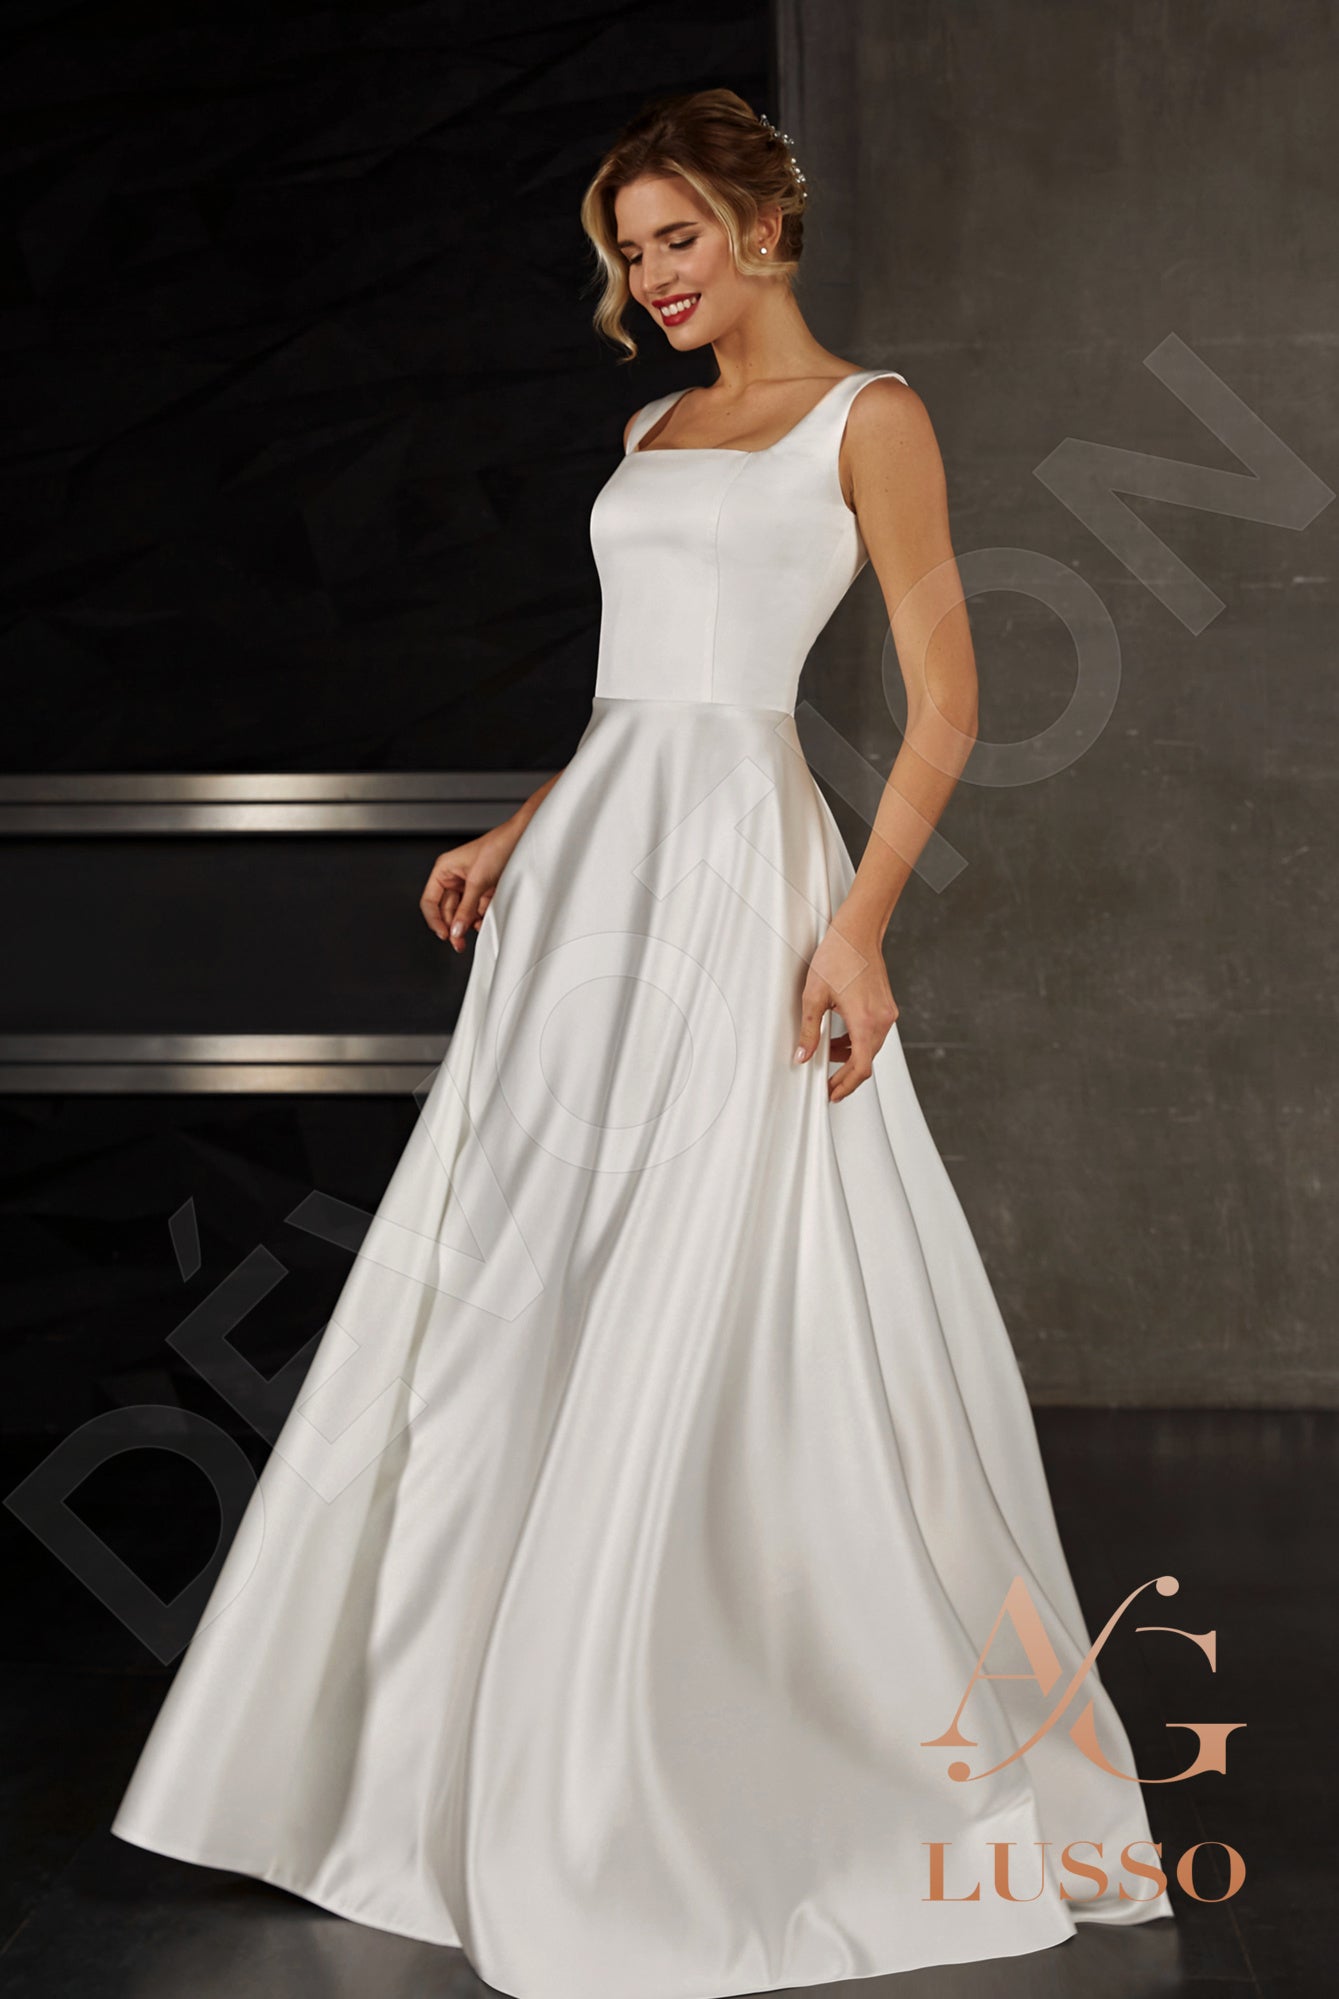 Dominique Open back A-line Sleeveless Wedding Dress Front